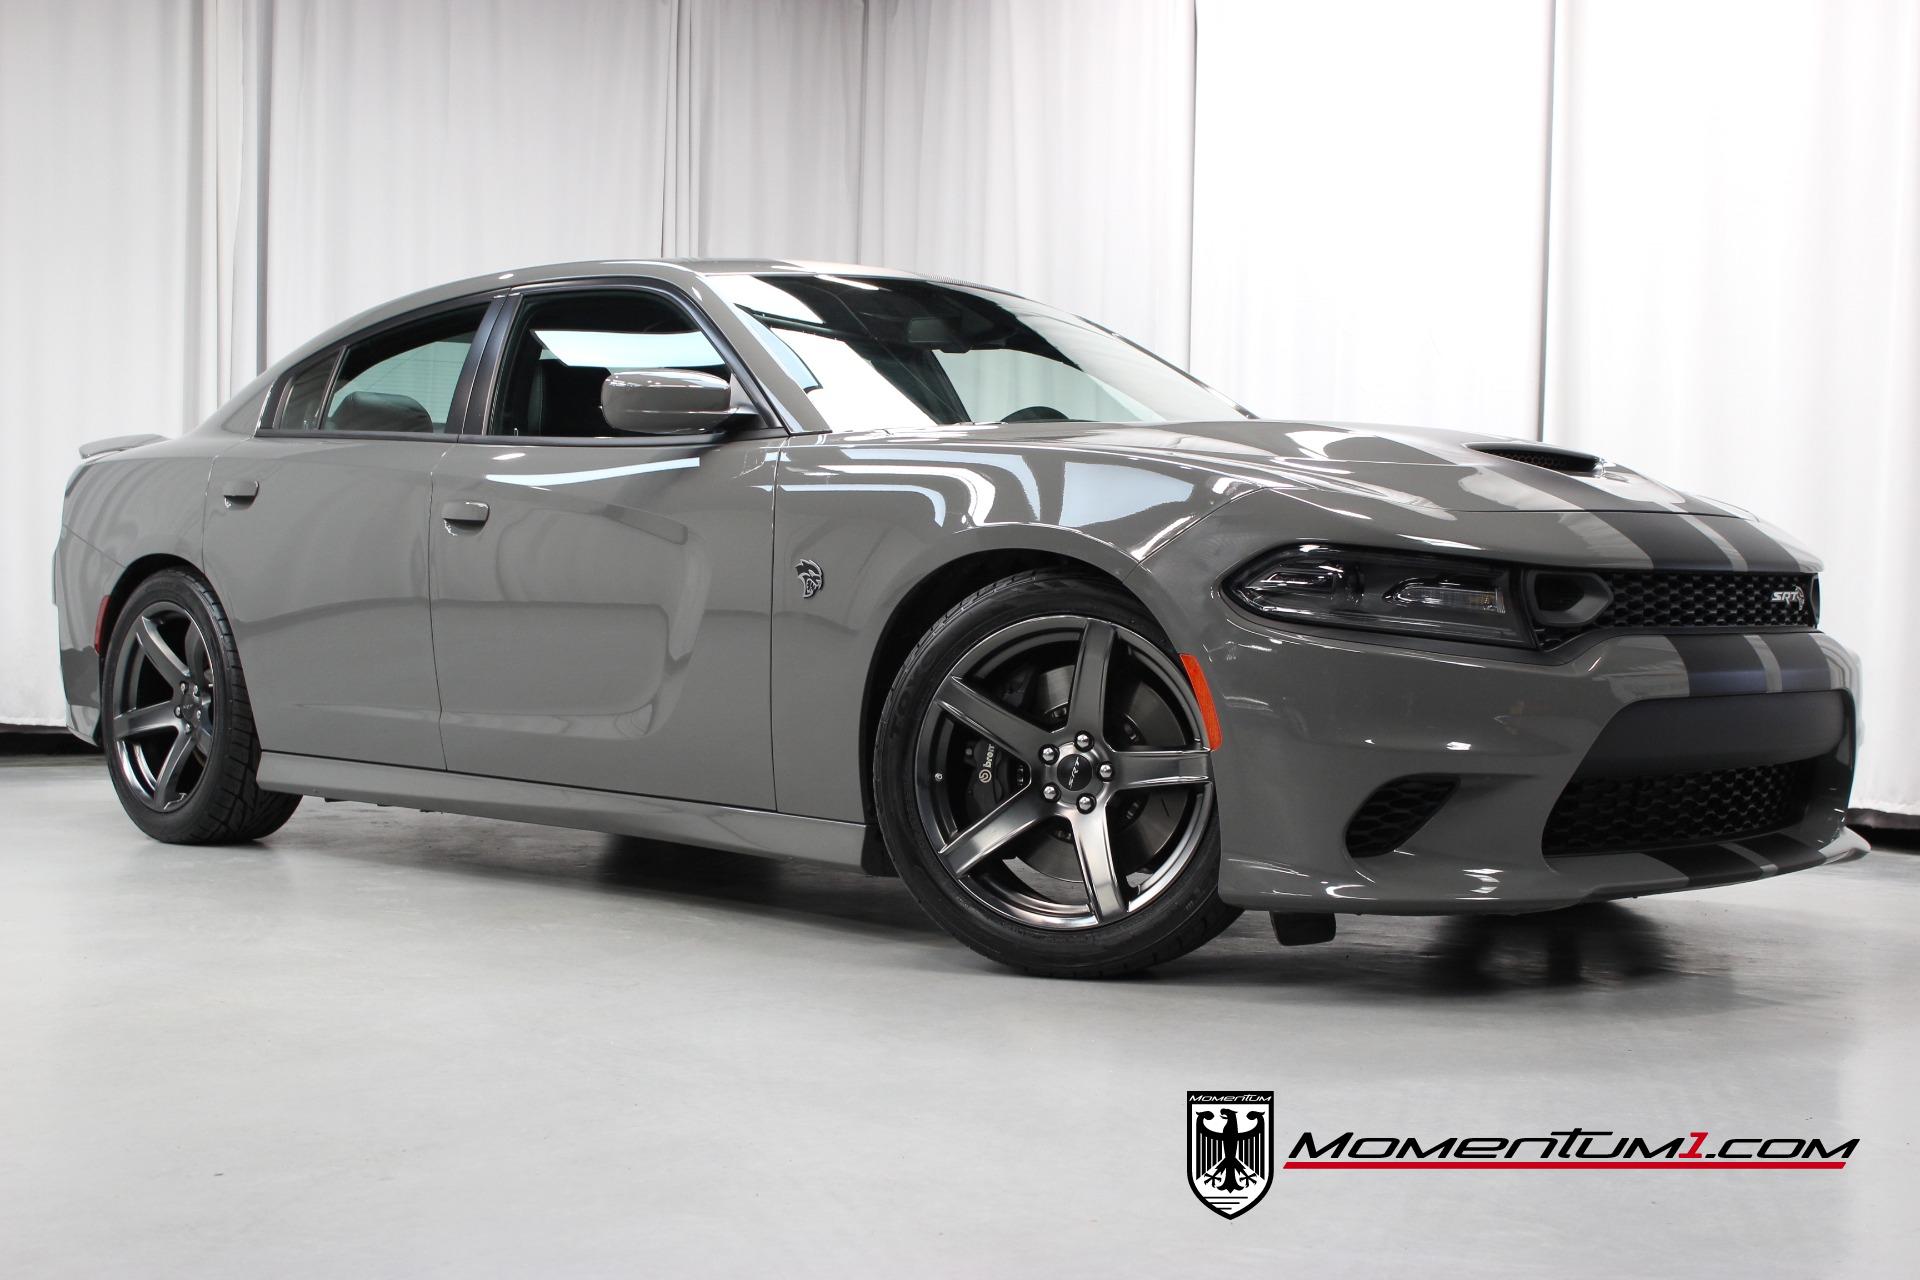 Used 2019 Dodge Charger SRT Hellcat For Sale (Sold) | Momentum Motorcars  Inc Stock #682096